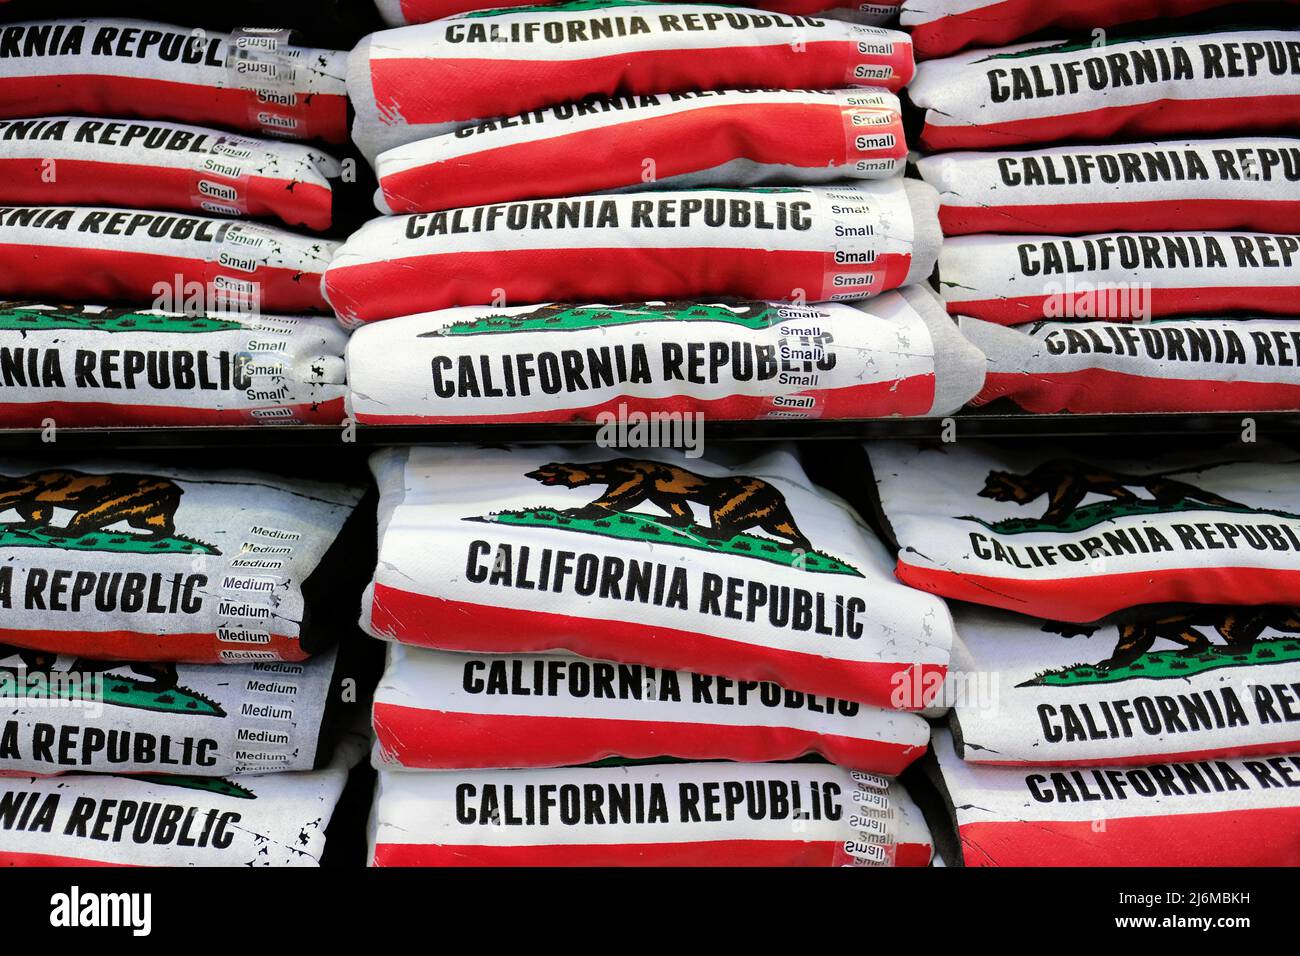 California Republic sweatshirts; giftshop items for visitors and tourists to the state of California, USA; gift store mementos and souvenirs. Stock Photo